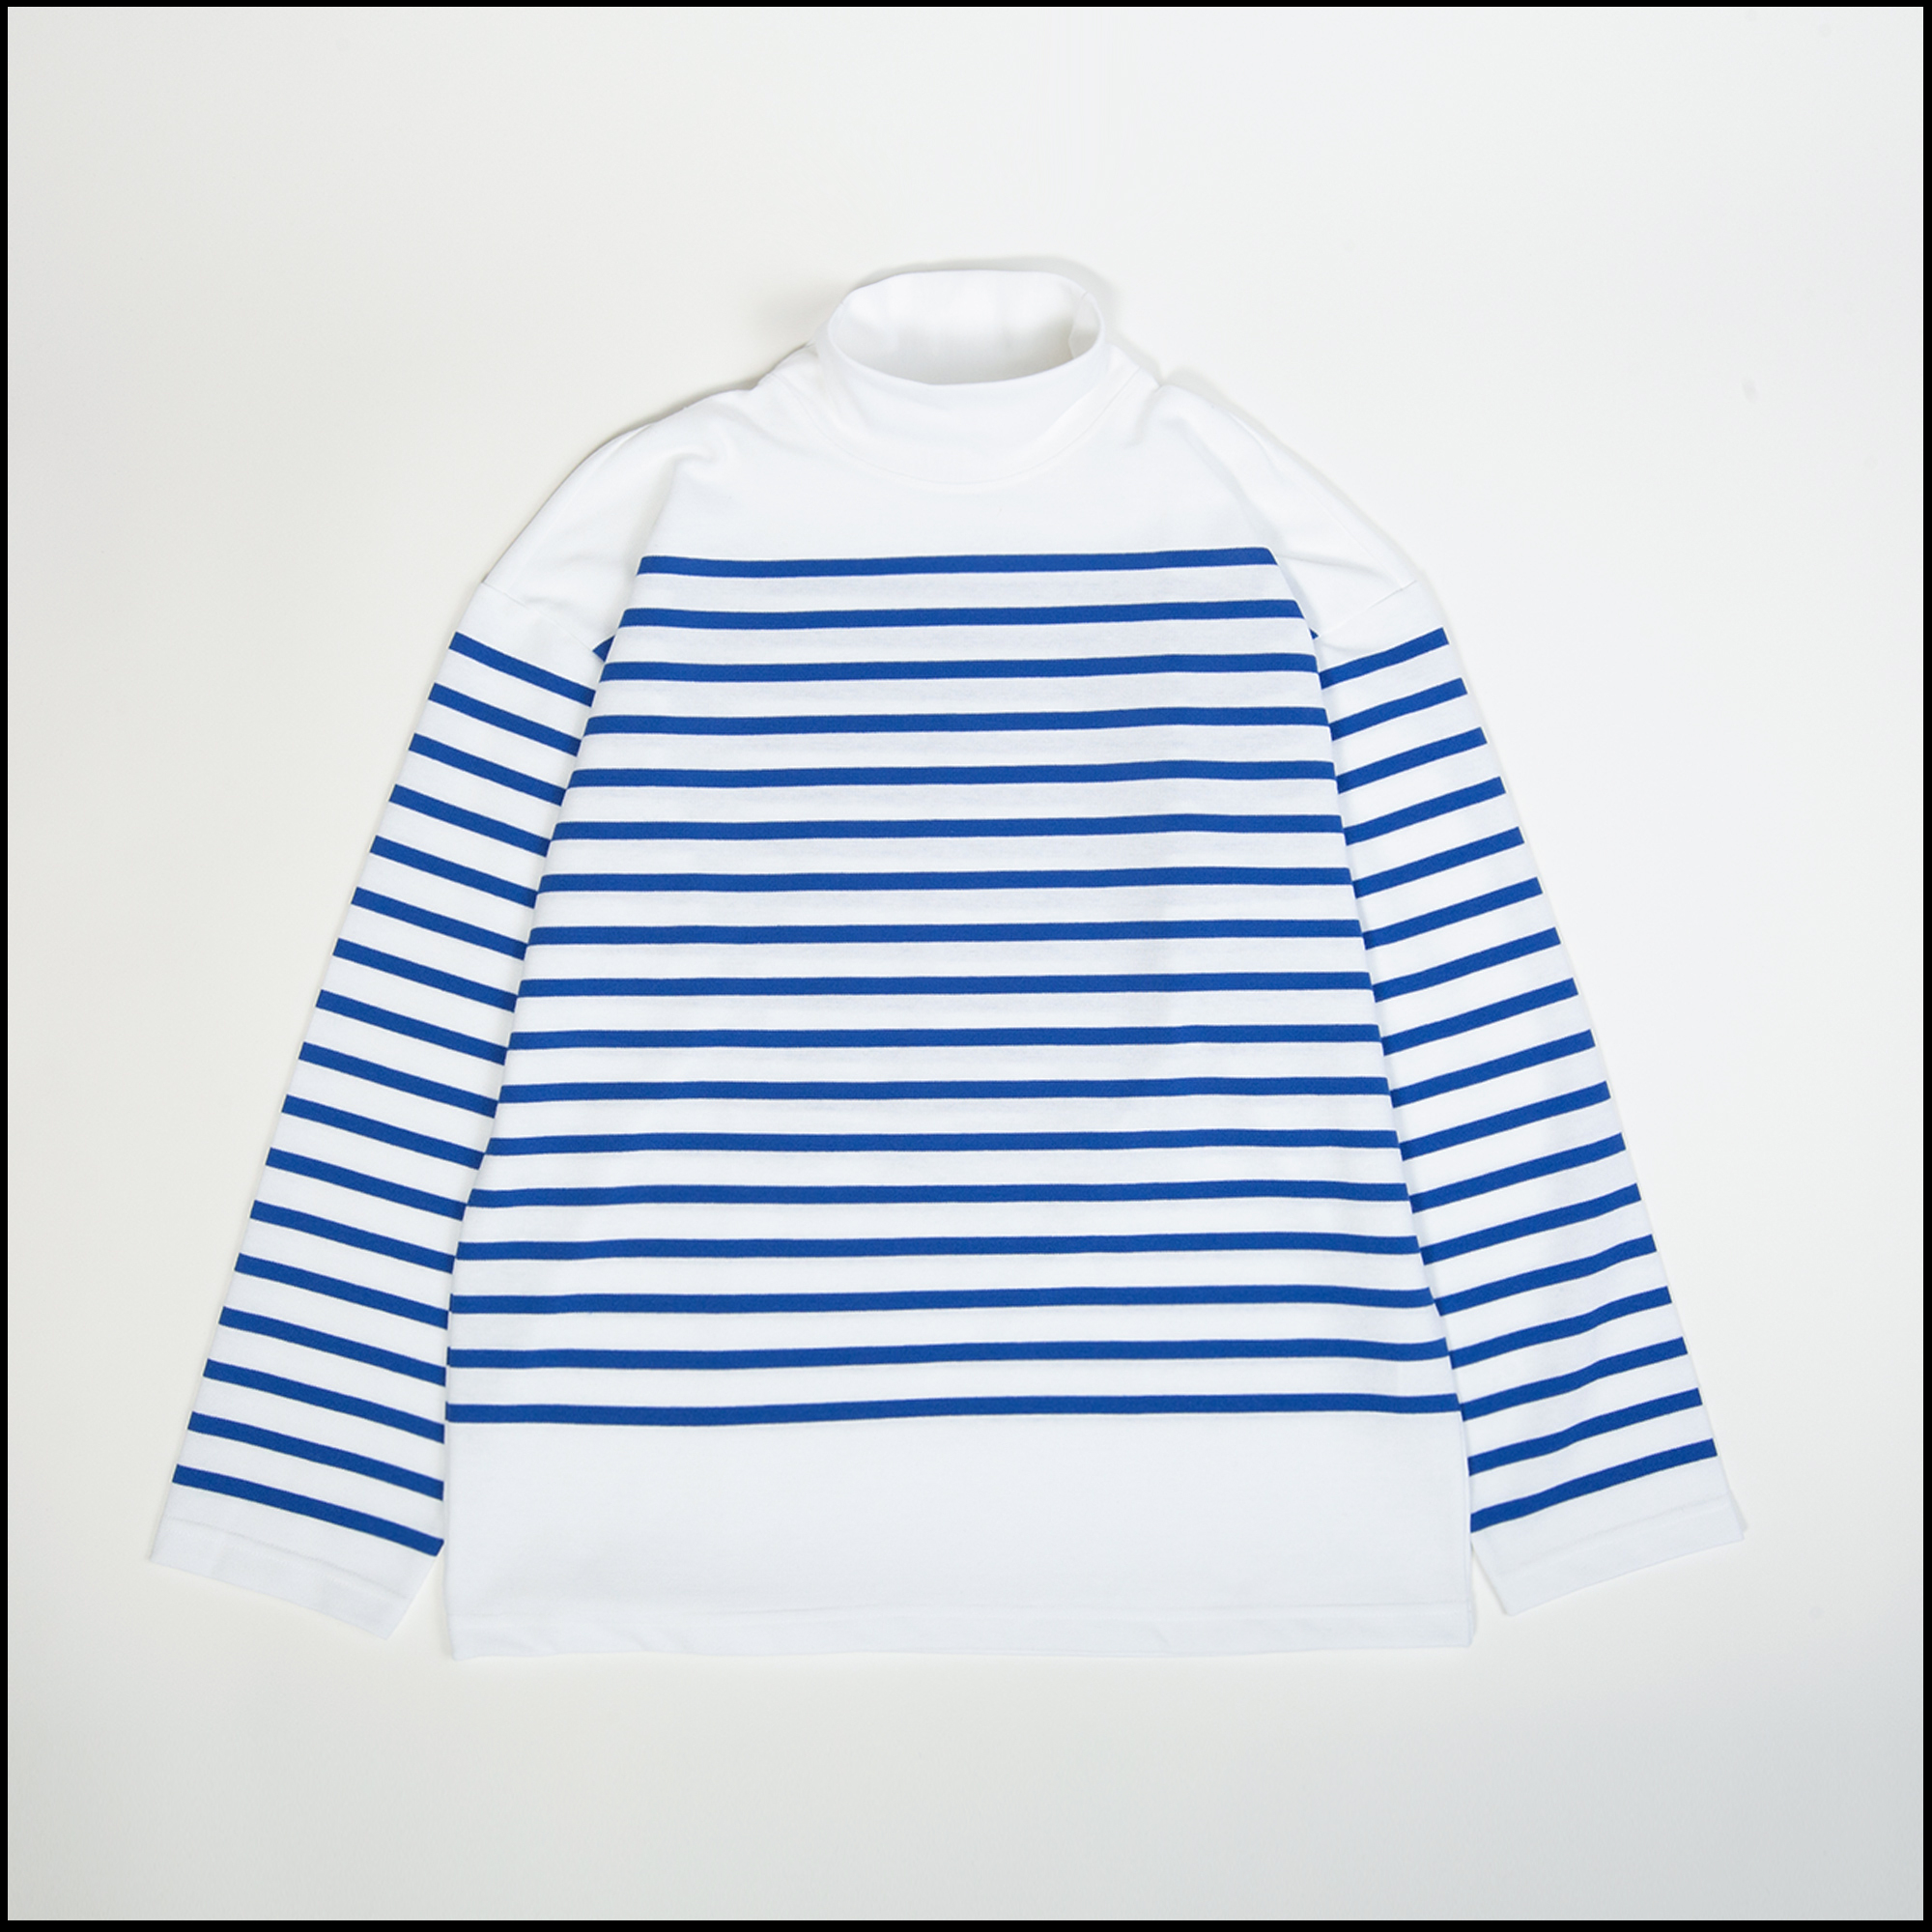 ORLO t-shirt in White Blue stripes color by Arpenteur